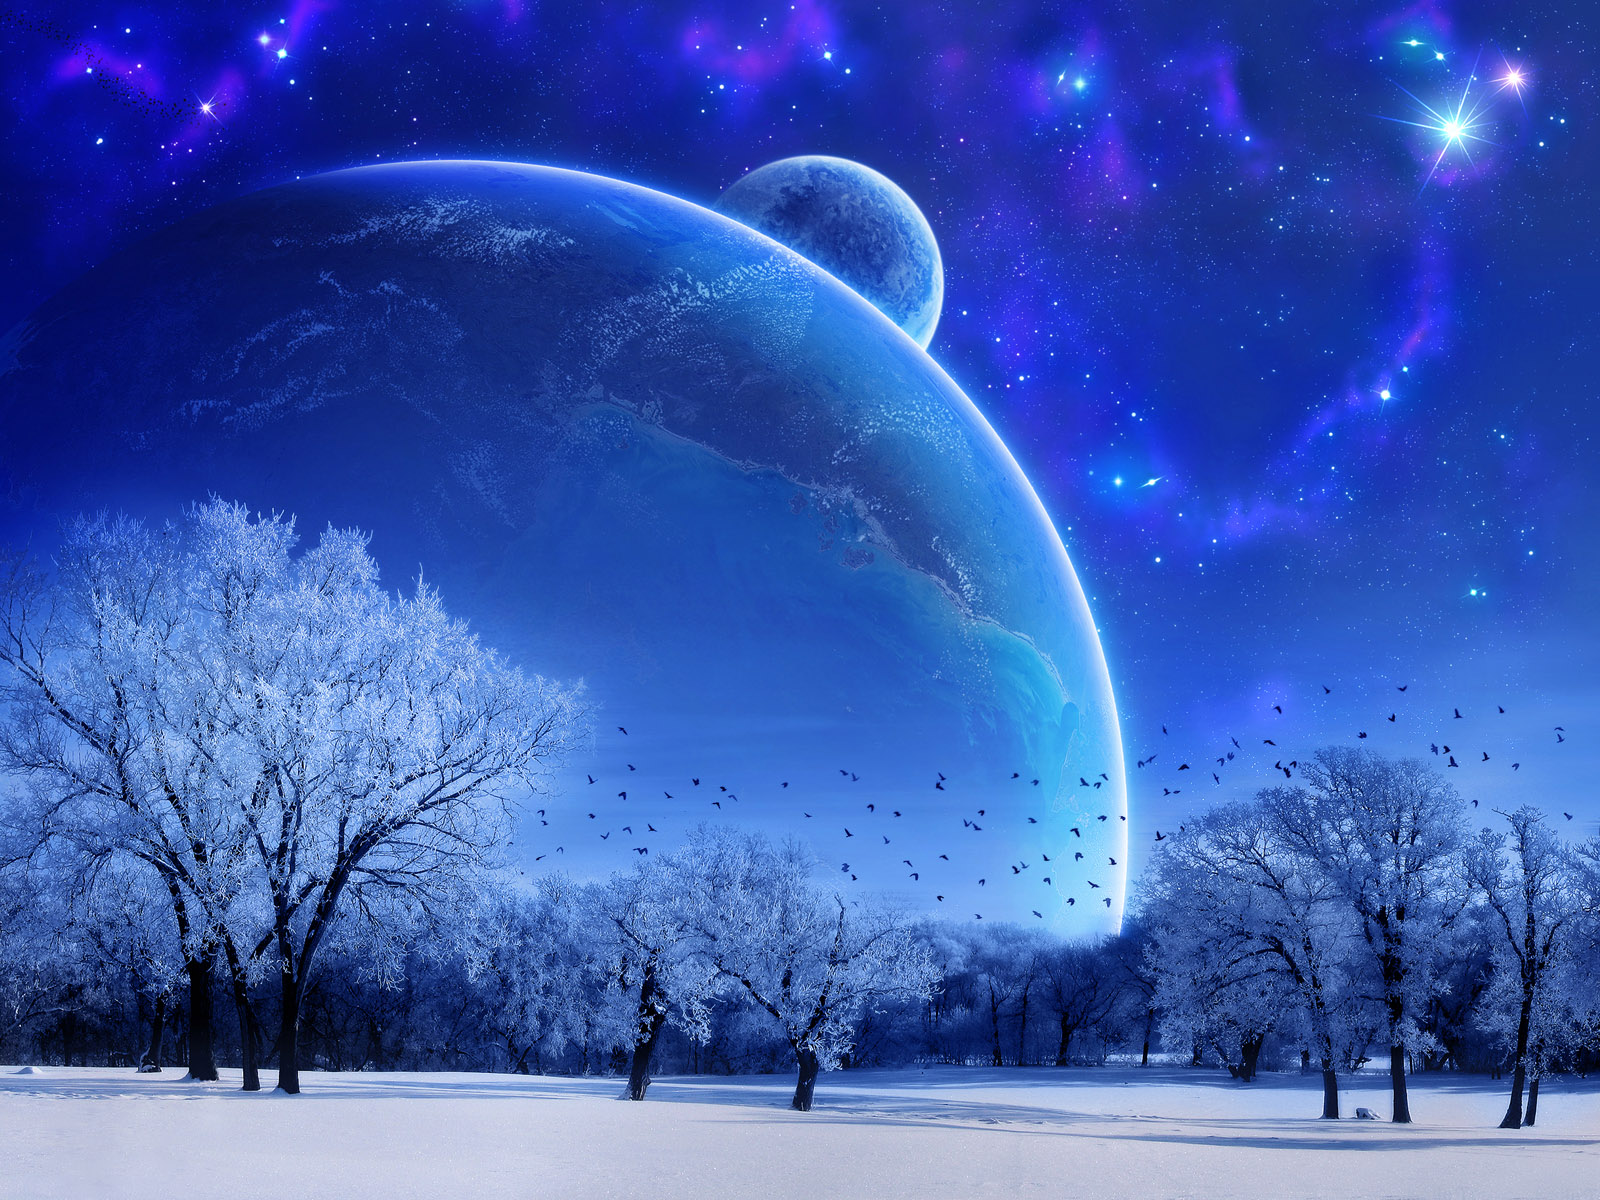 Universe Artistic Wallpapers HD 1600x1200   Photo 41 of 54 phombo